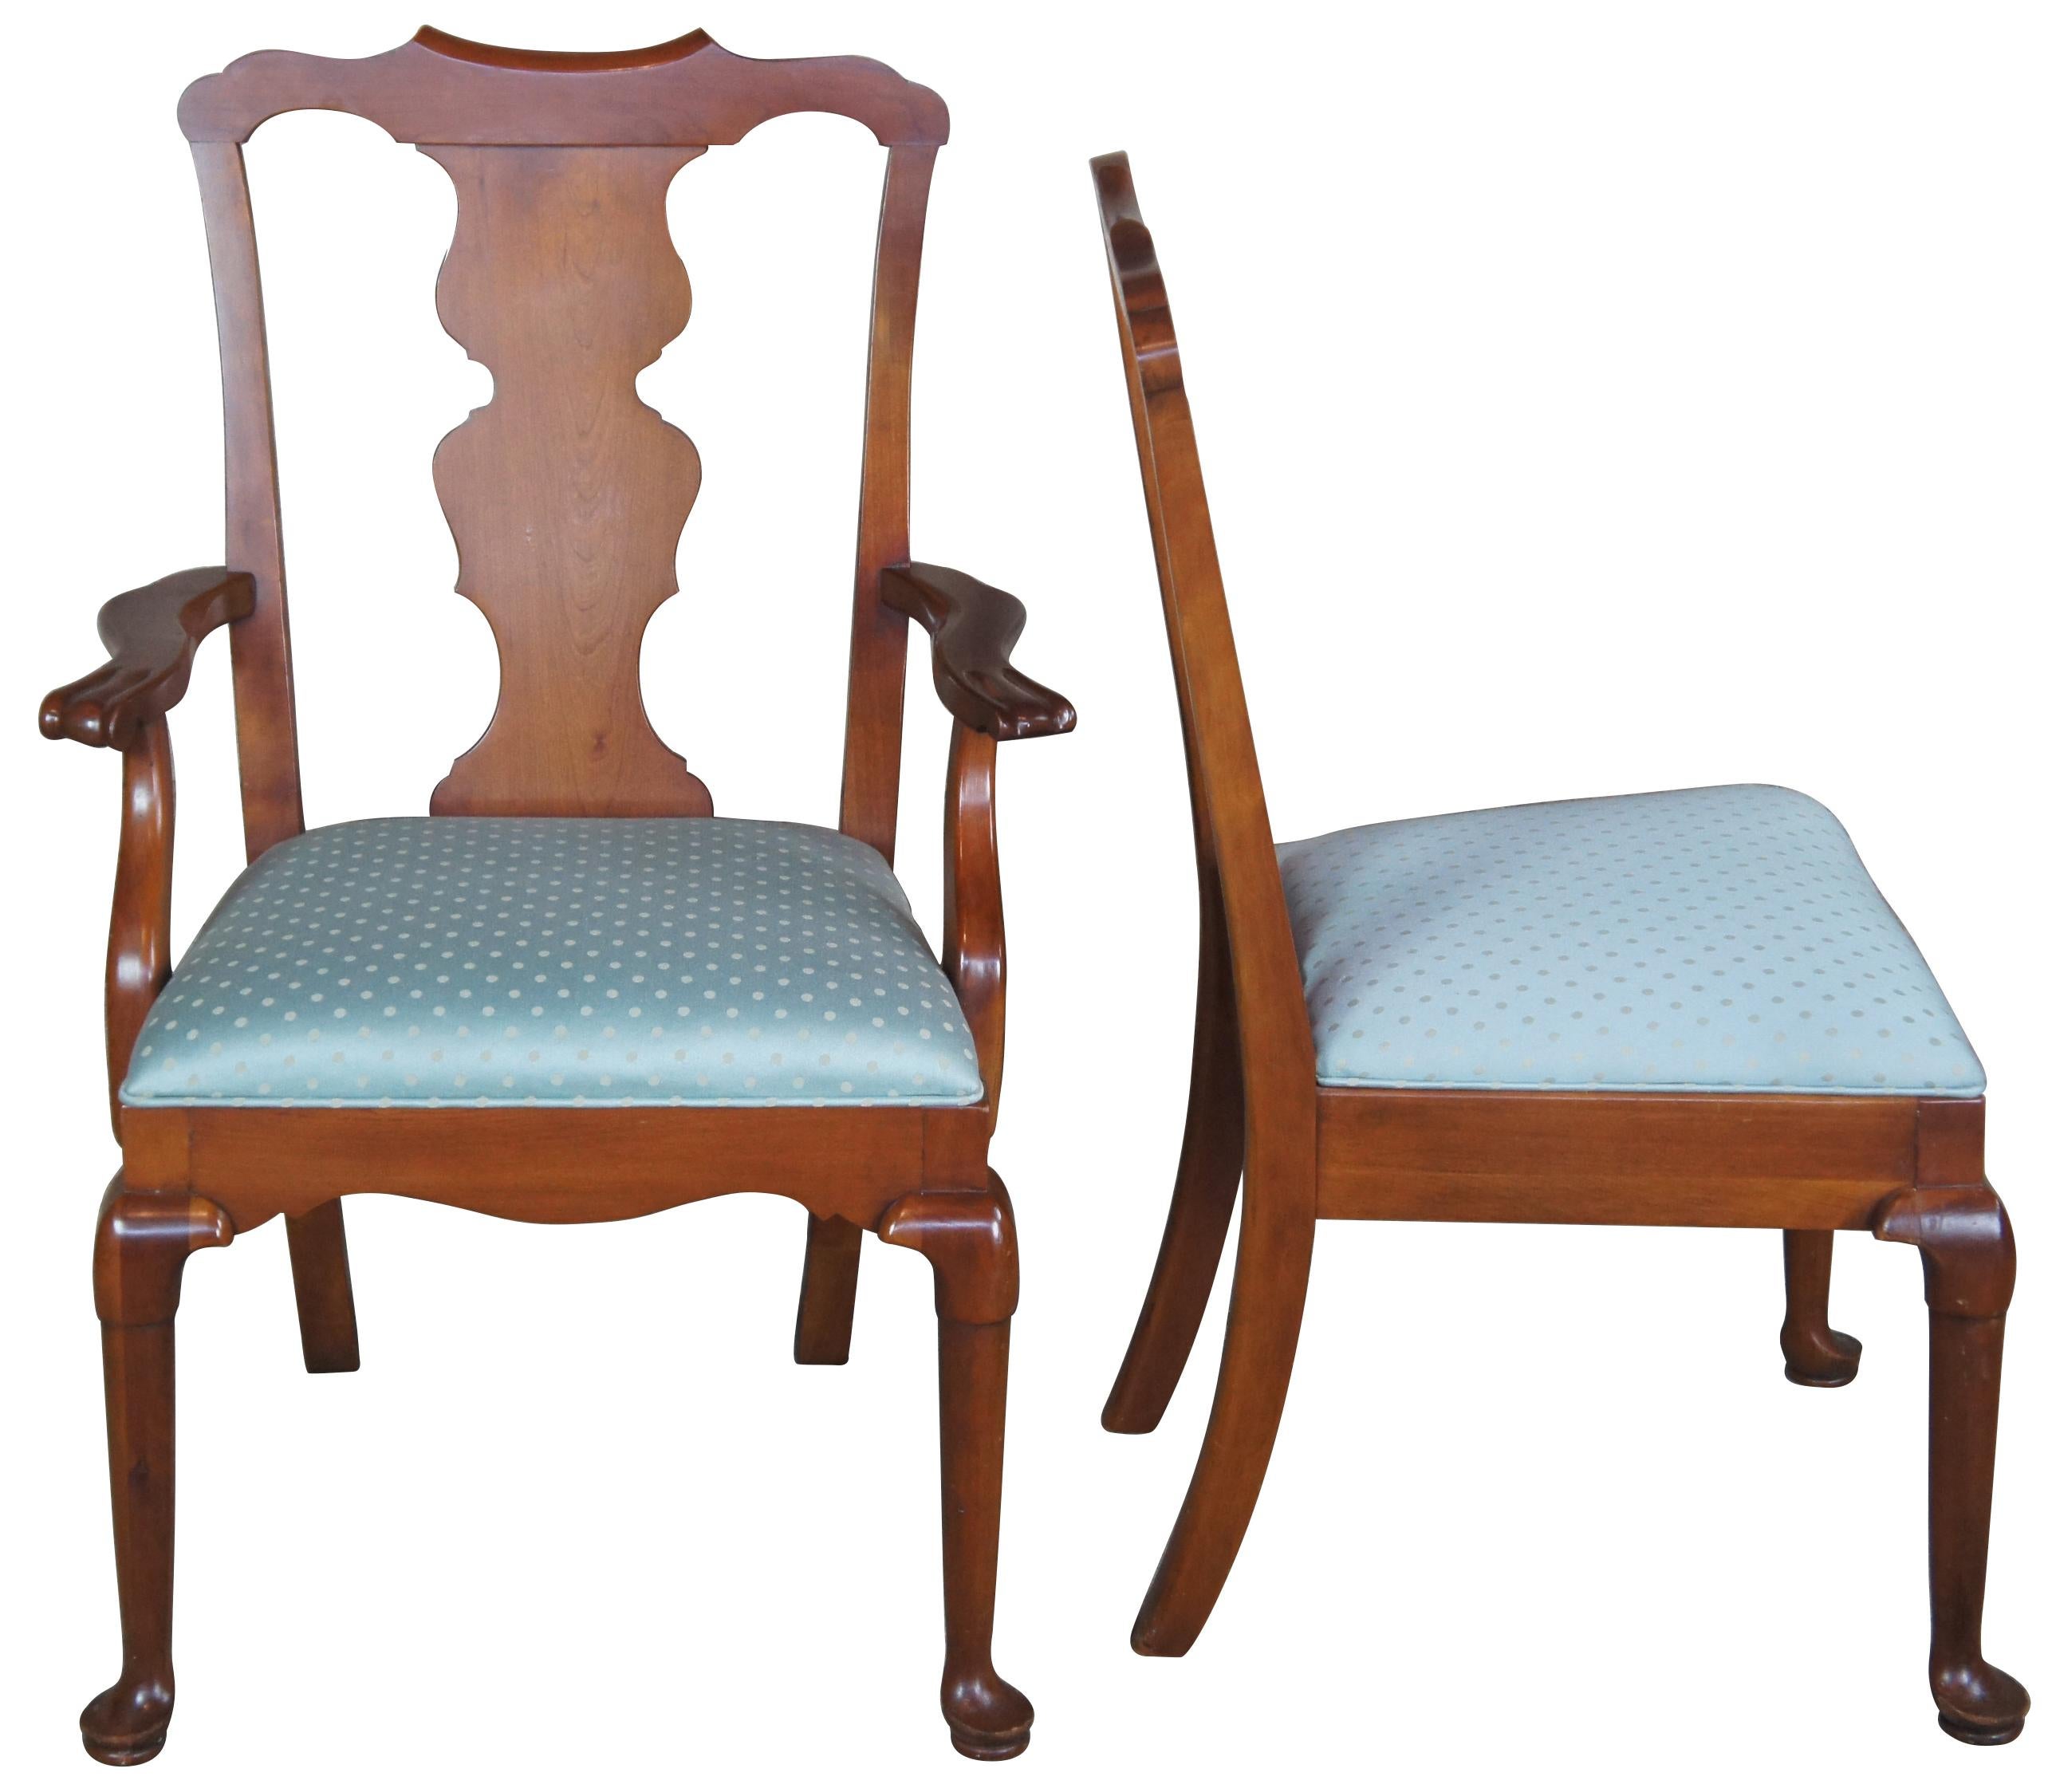 Eight Penn. House dining chairs, circa made from cherry with a blend of early American and Queen Anne styling. Features a vase shaped splat, carved rail and pad feet.